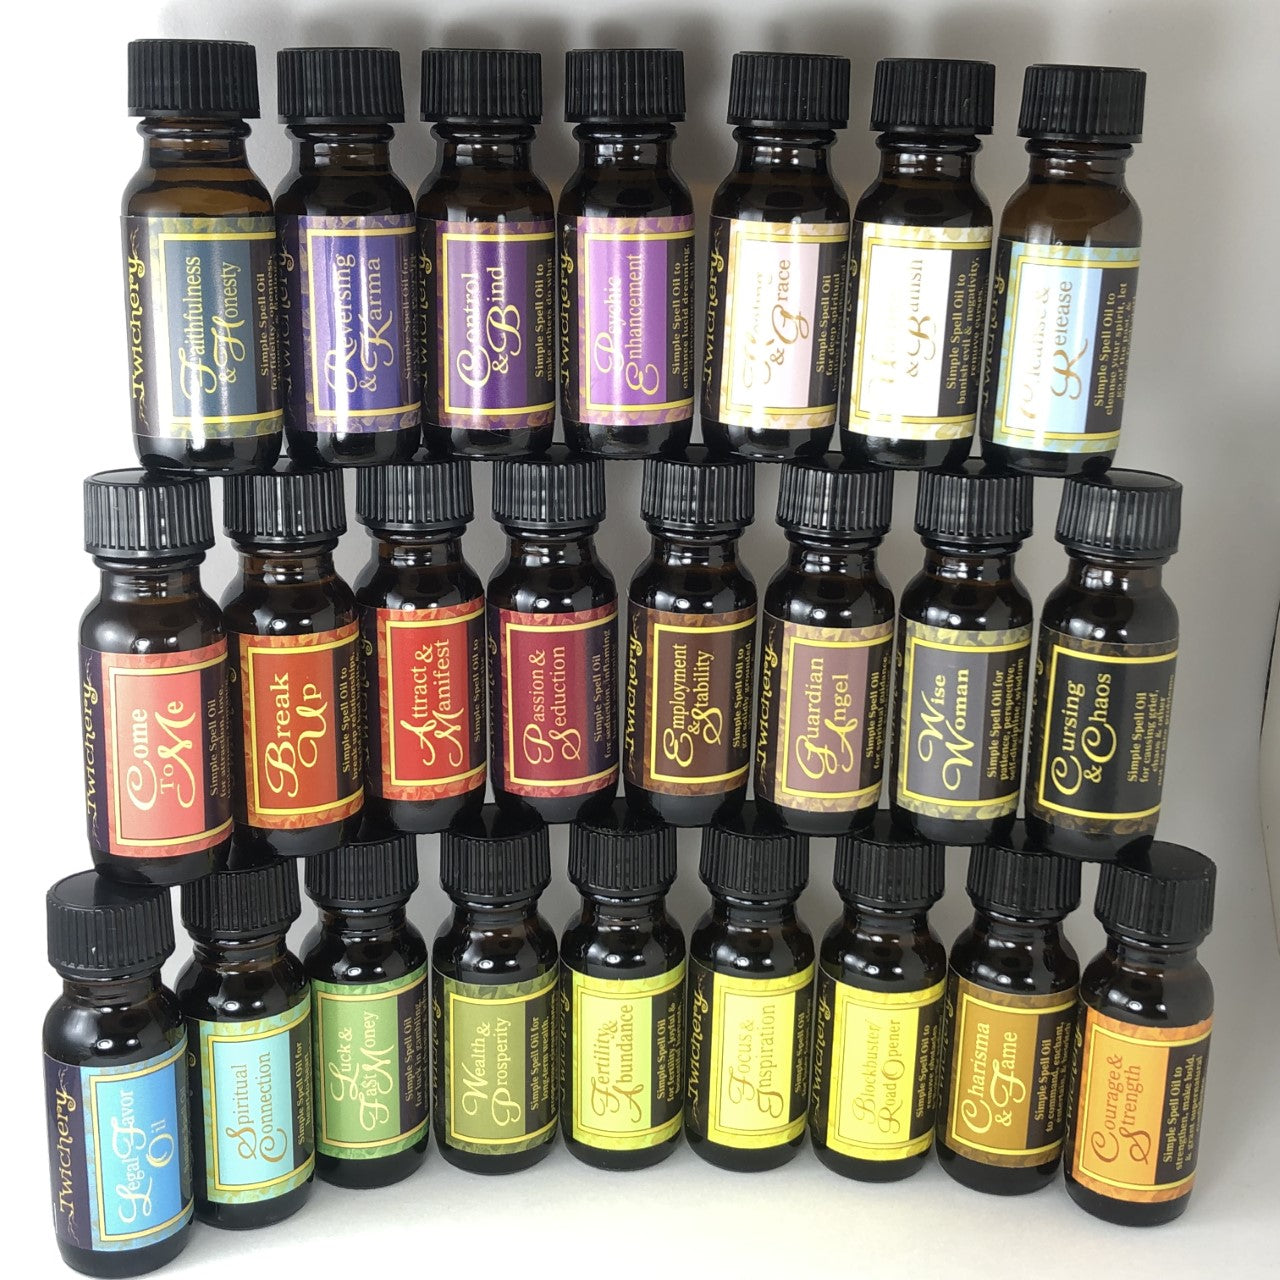 Twichery Quikspell Oils for being done with bad habits and relationships. Beautifully collectible! Wise Woman Oil pictured with all other Twichery Quikspell Oils! Hoodoo, Voodoo, Wicca, Pagan